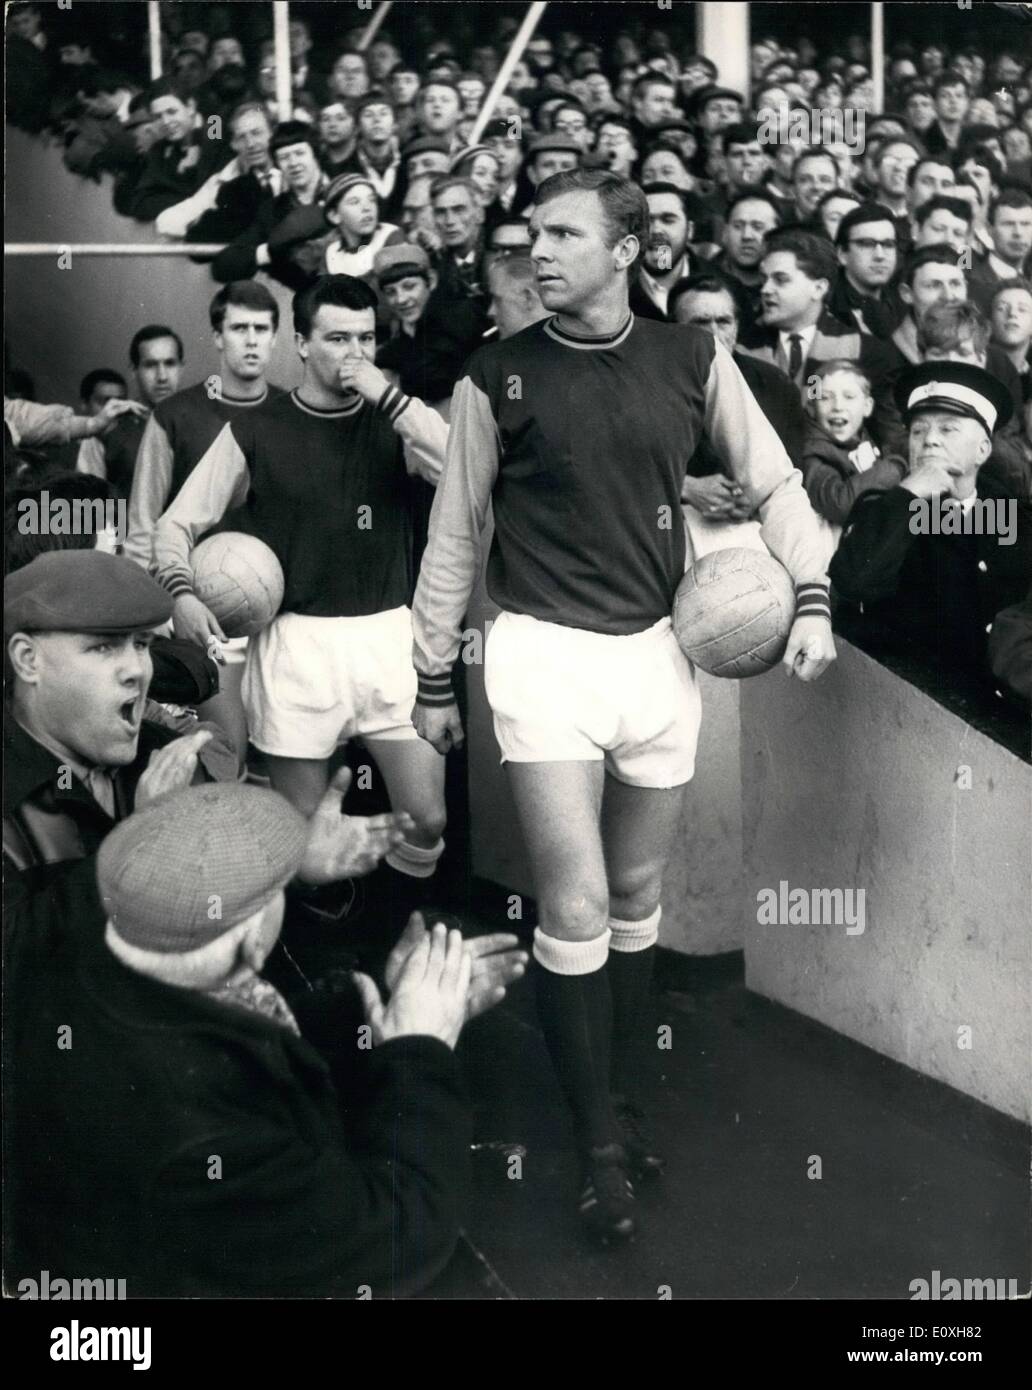 Dec. 31, 1966 - 31-12-66 Bobby Moore (O.B.E.) takes the field for today's West Ham versus Leicester soccer match. Bobby Moore, captain of West ham, and also captain of the England soccer team, is to receive the O.B.C. according to the New Year Honours List which will be announced tomorrow Jan. 1st 1967. Today he lead his team on the field with this news a secret from the crown. Photo Shows: Bobby Moore leads his team on to the field for today's match. Stock Photo